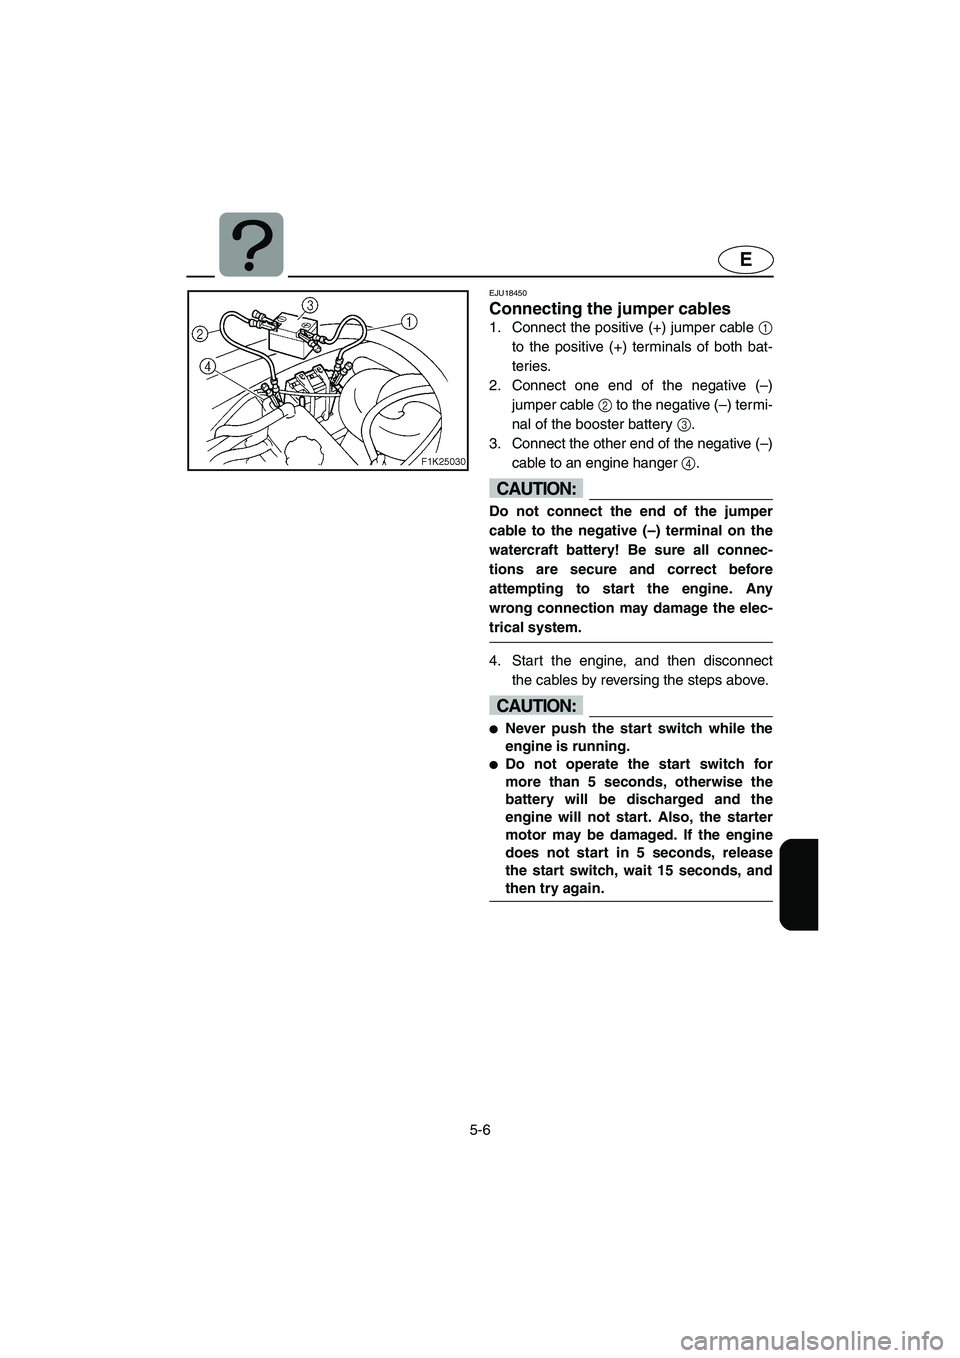 YAMAHA VX SPORT 2006  Owners Manual 5-6
E
EJU18450 
Connecting the jumper cables 
1. Connect the positive (+) jumper cable 1
to the positive (+) terminals of both bat-
teries. 
2. Connect one end of the negative (–)
jumper cable 2 to 